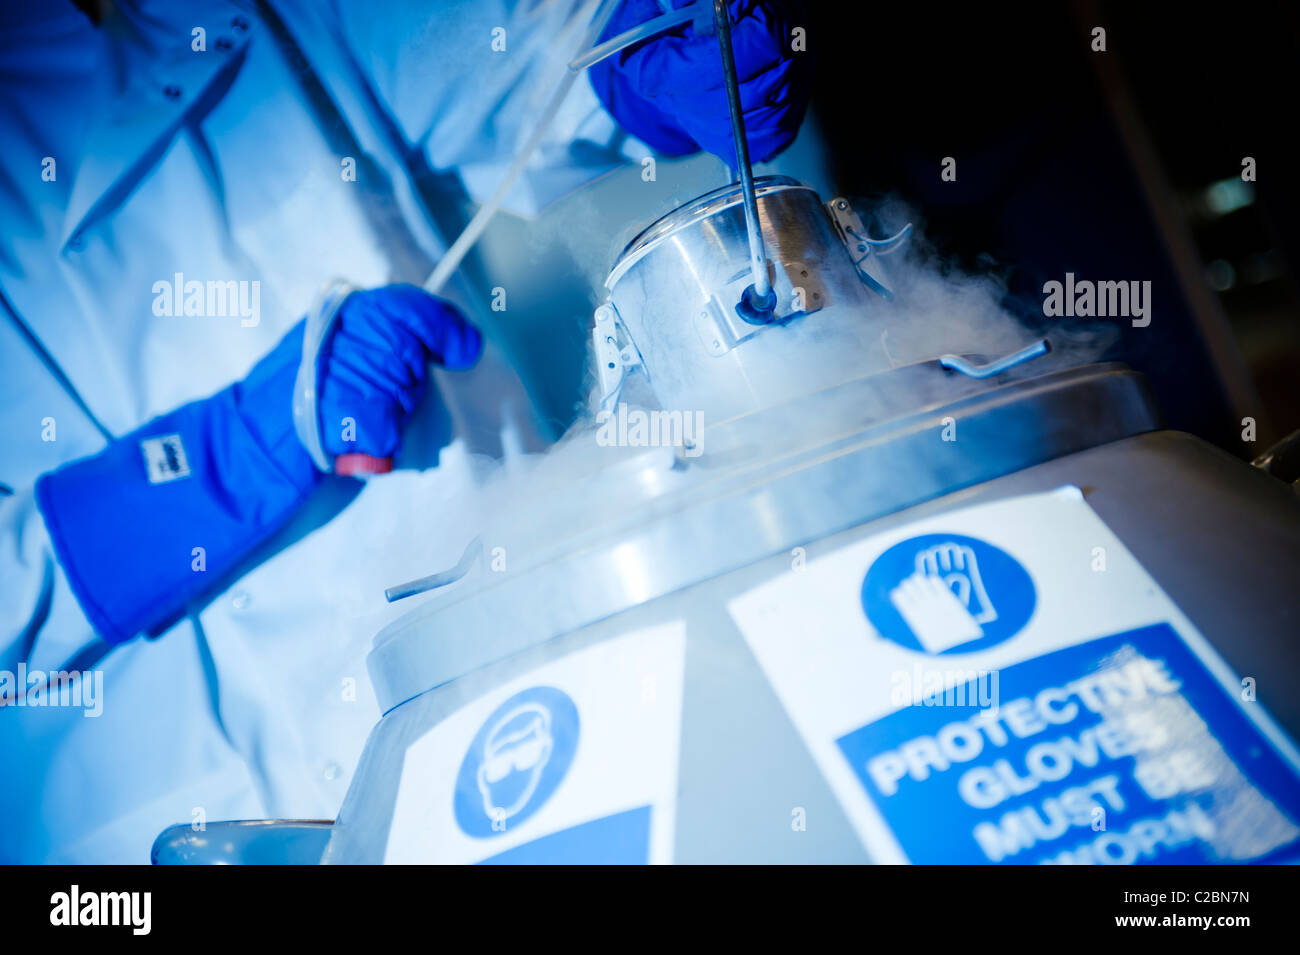 Scientist wearing thick blue gloves and white lab coat lifting container out of liquid nitrogen container Stock Photo